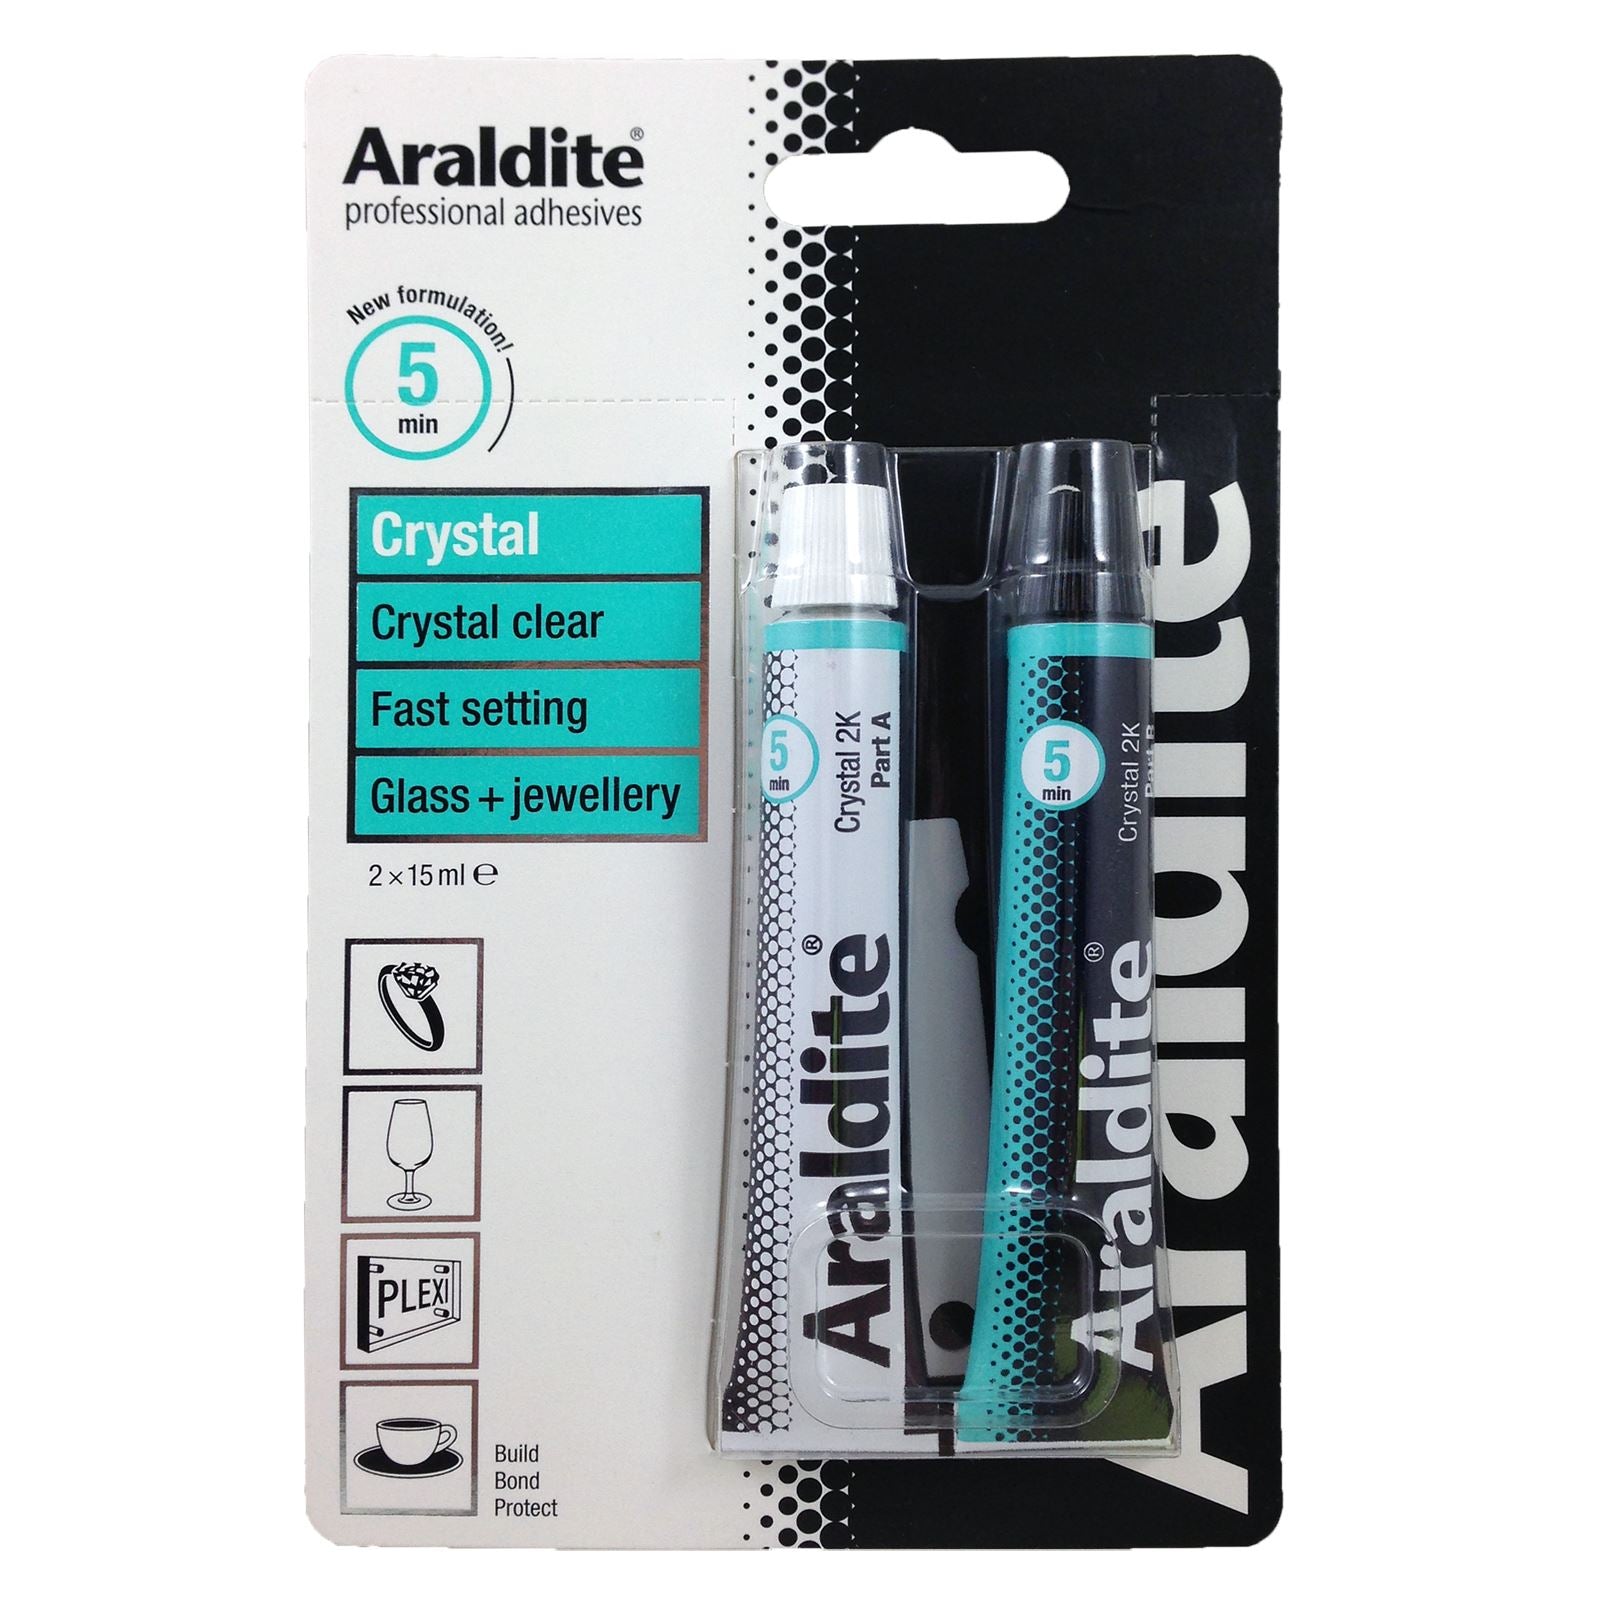 Araldite 2 x 15ml Crystal Clear Glass and Jewellery Strong Epoxy 2 Part Glue